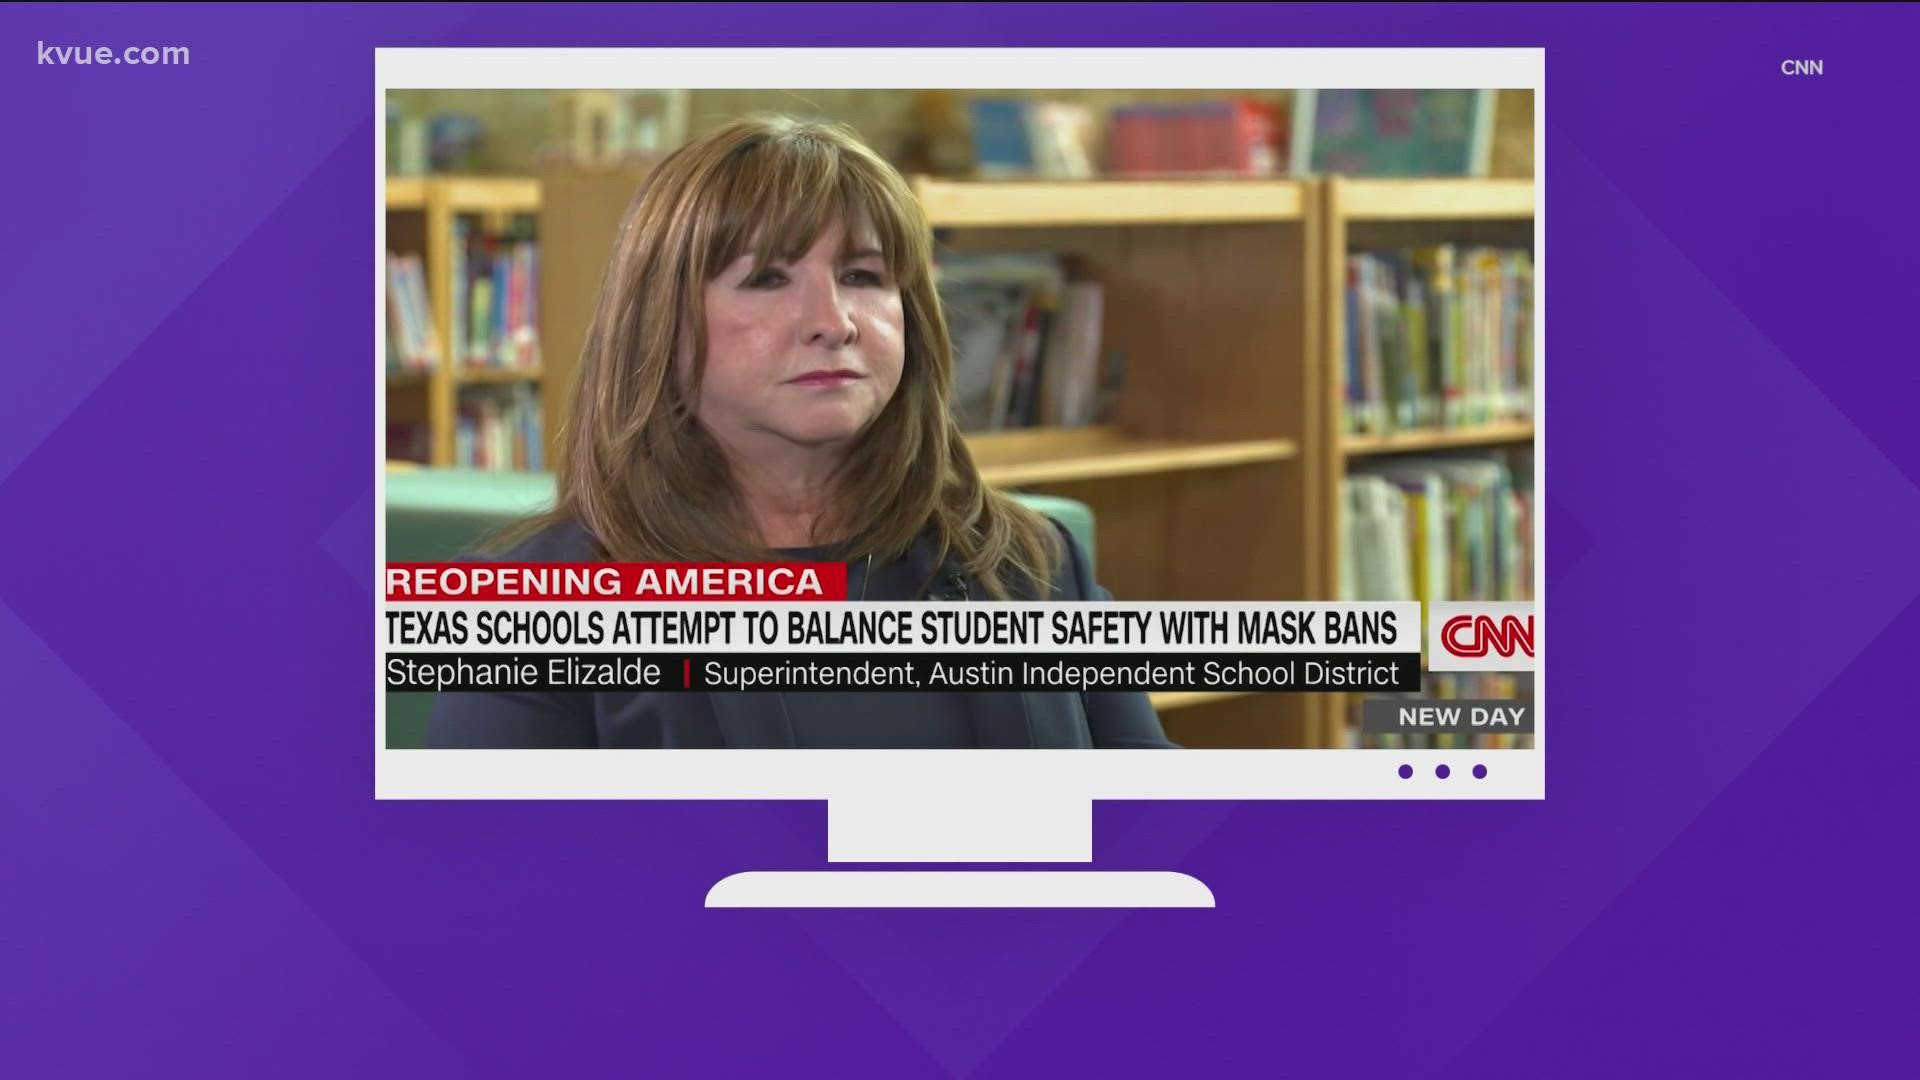 Austin ISD Superintendent Stephanie Elizalde told CNN she wants to require masks but can't due to Abbott's executive order.